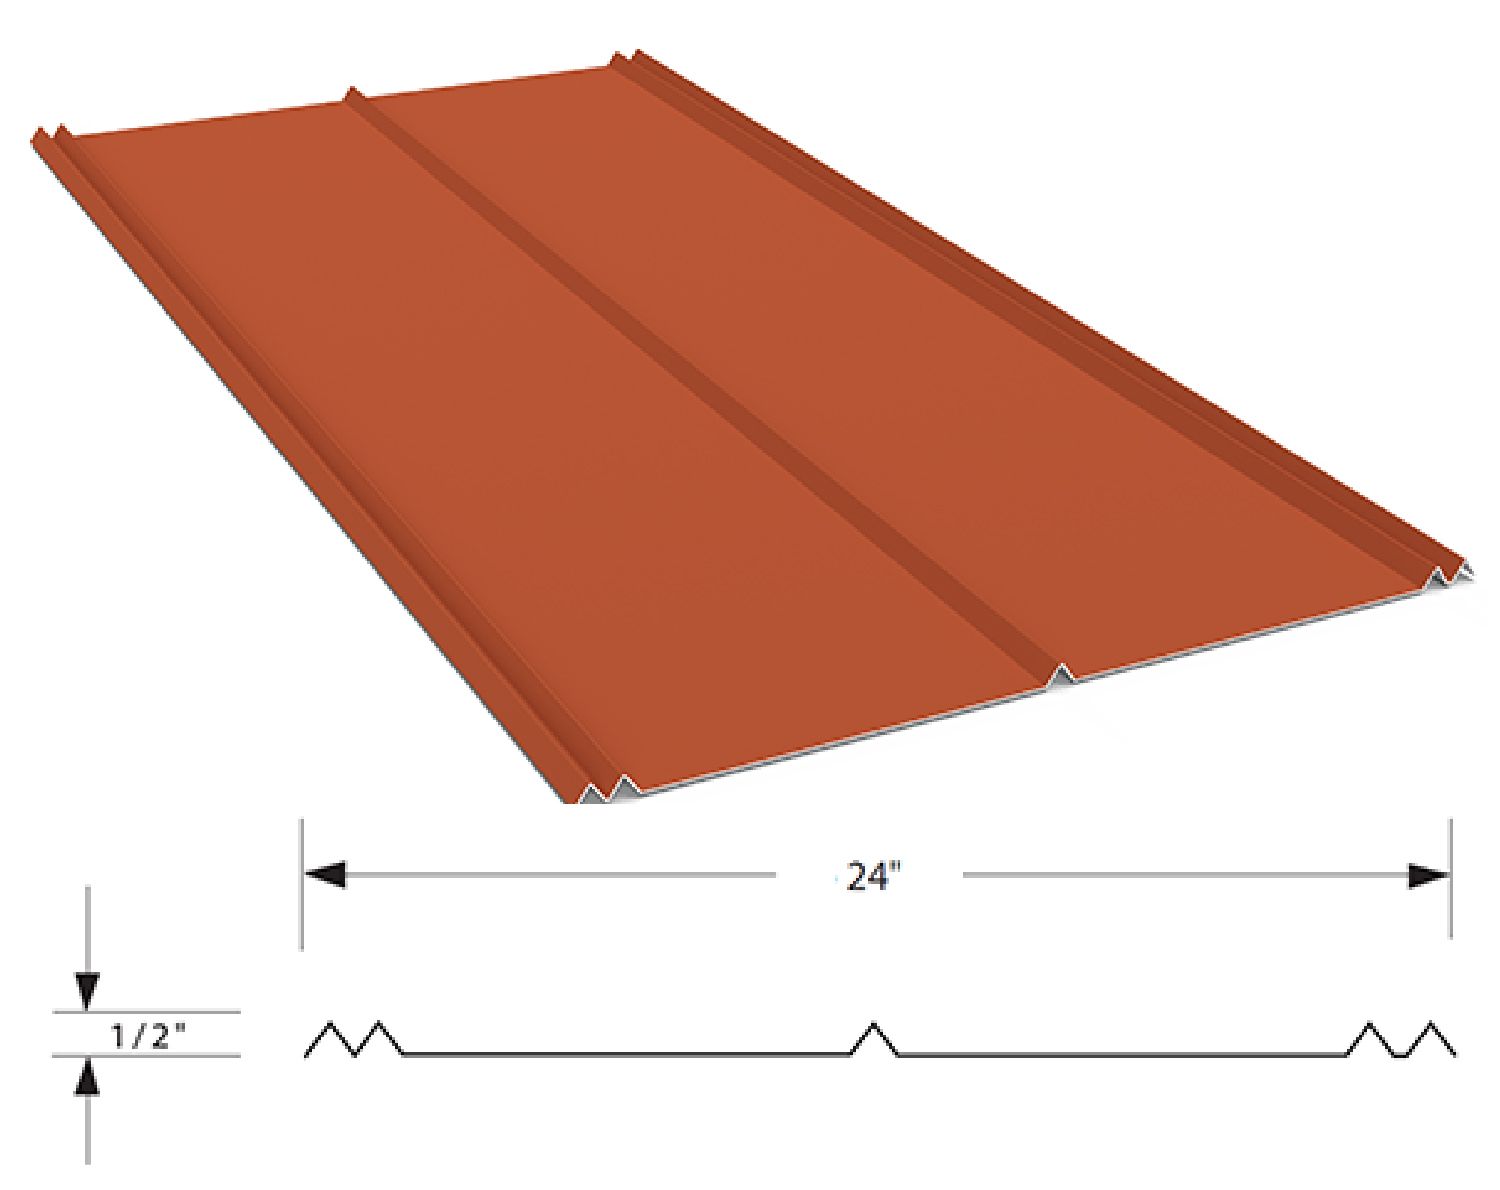 a drawing of a red metal roof with measurements